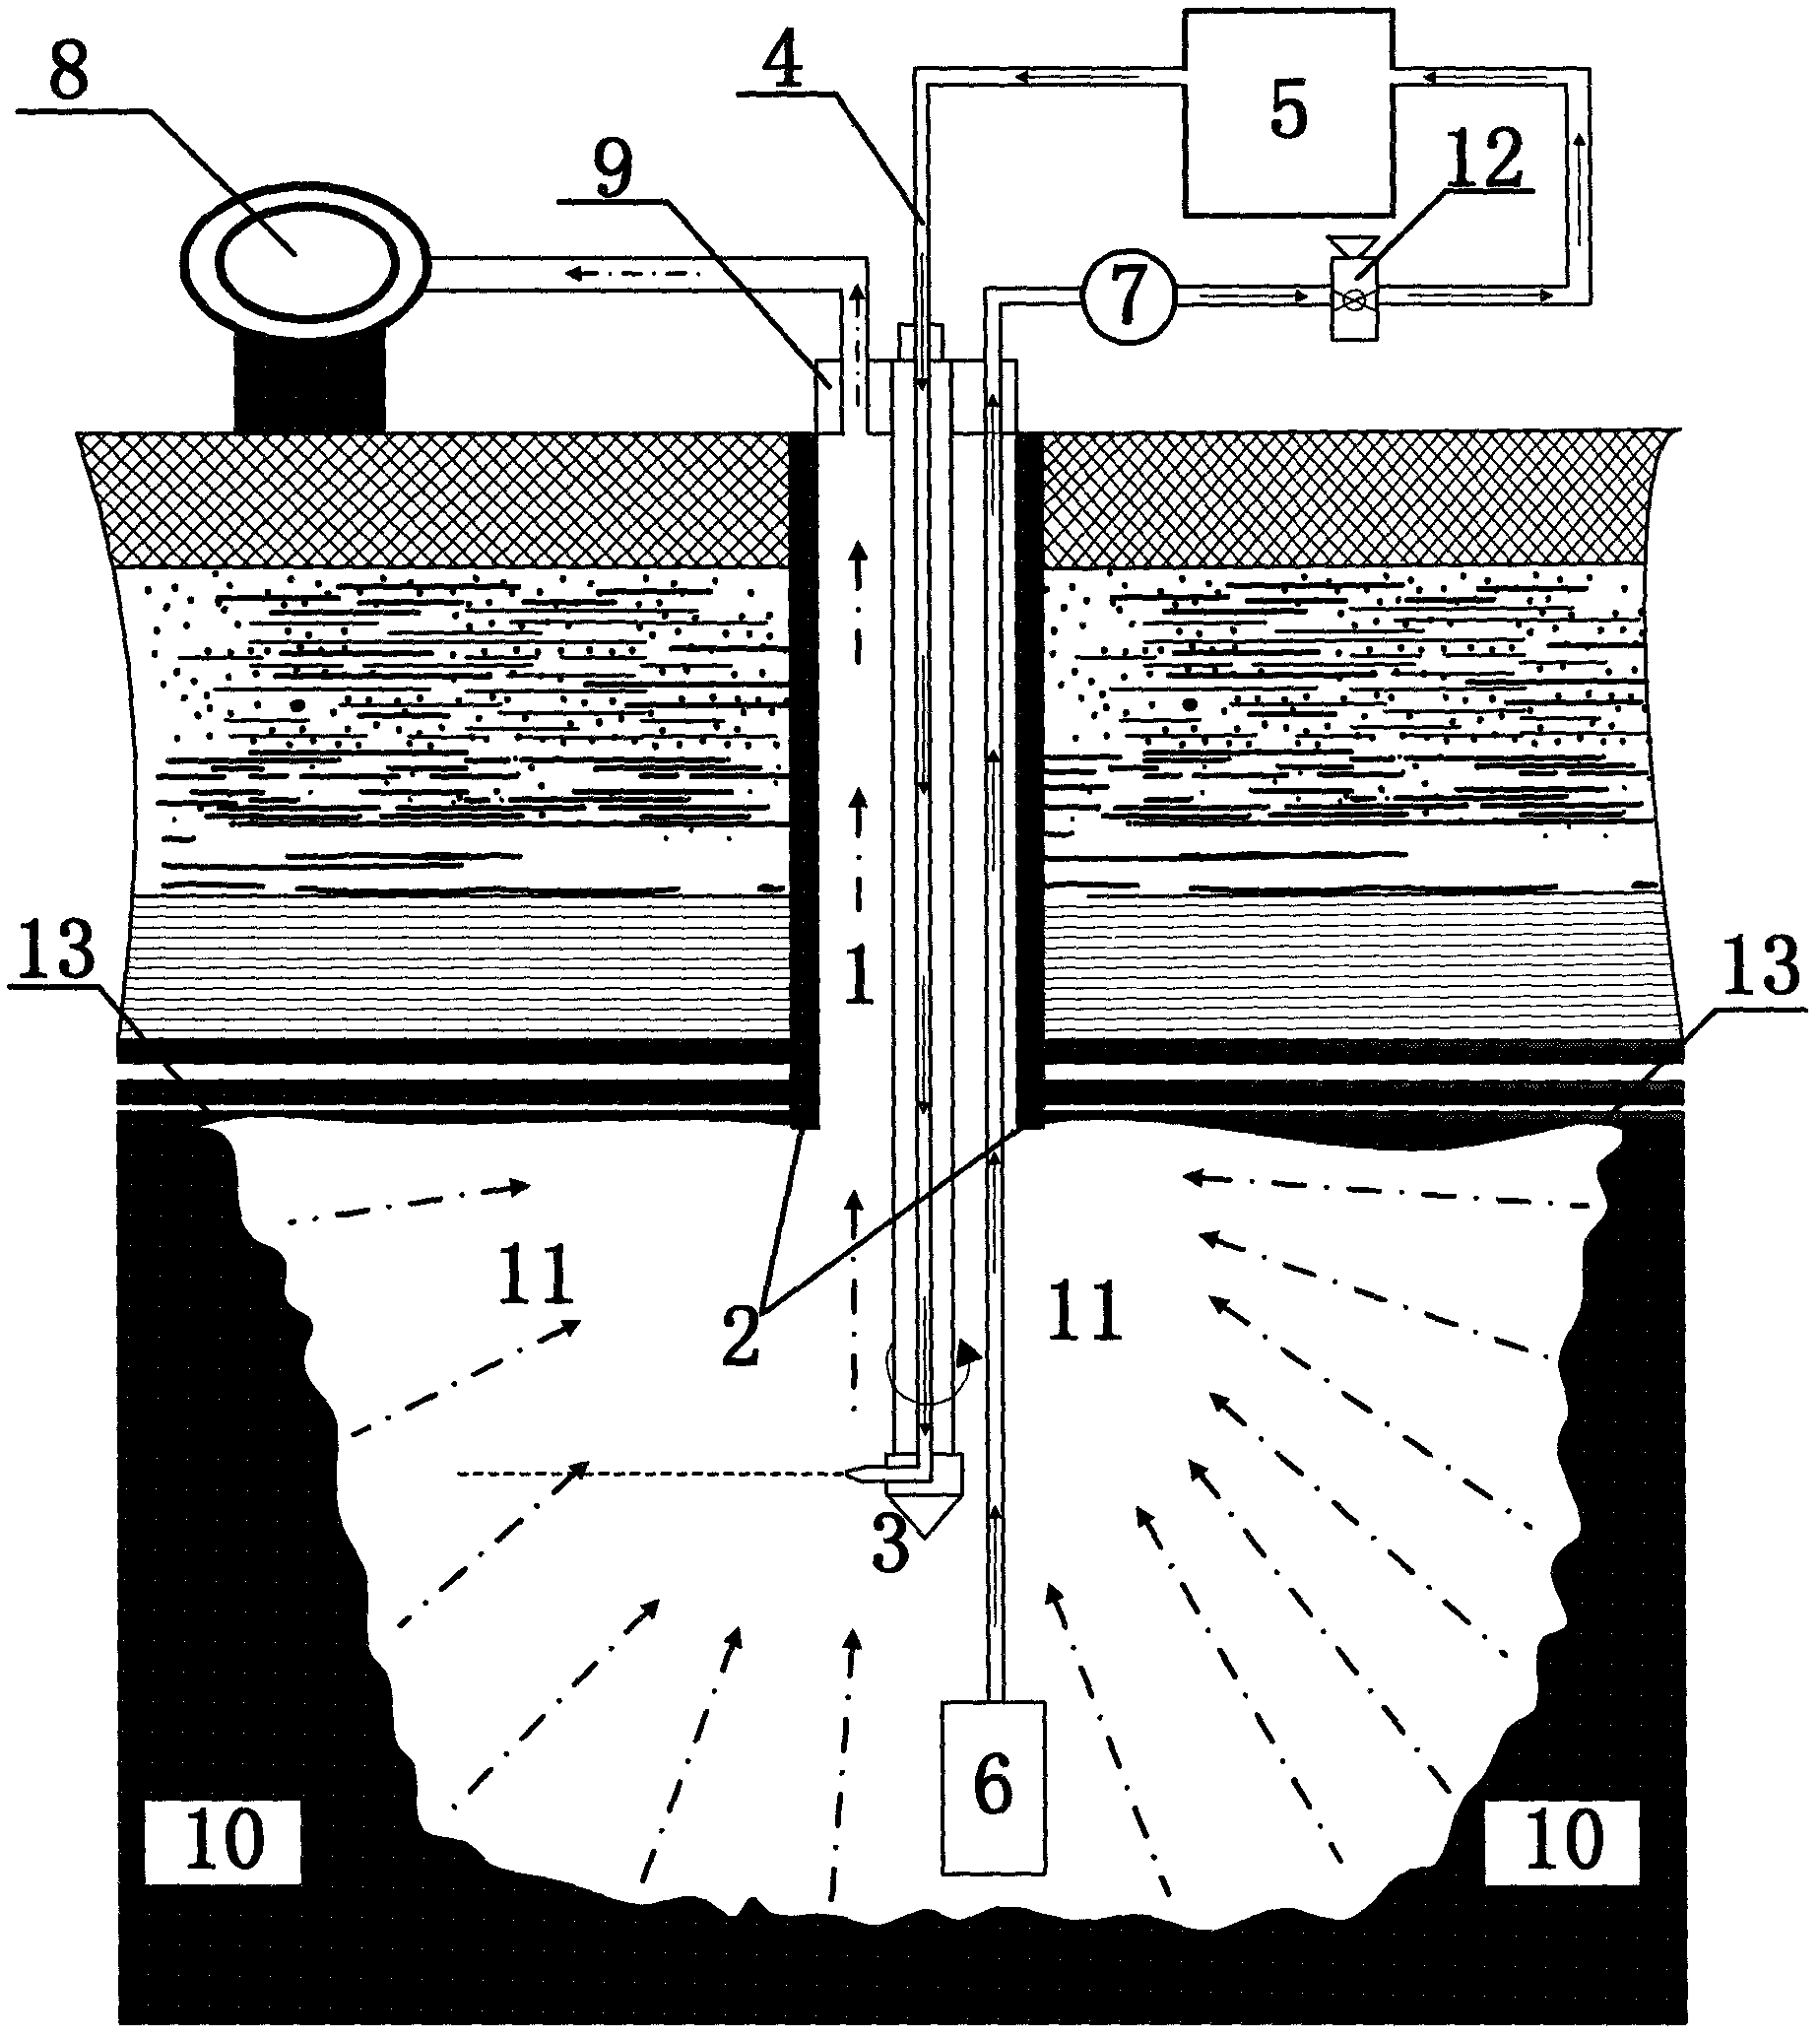 Method for mining coal and gas by hydraulic jet grouting washout